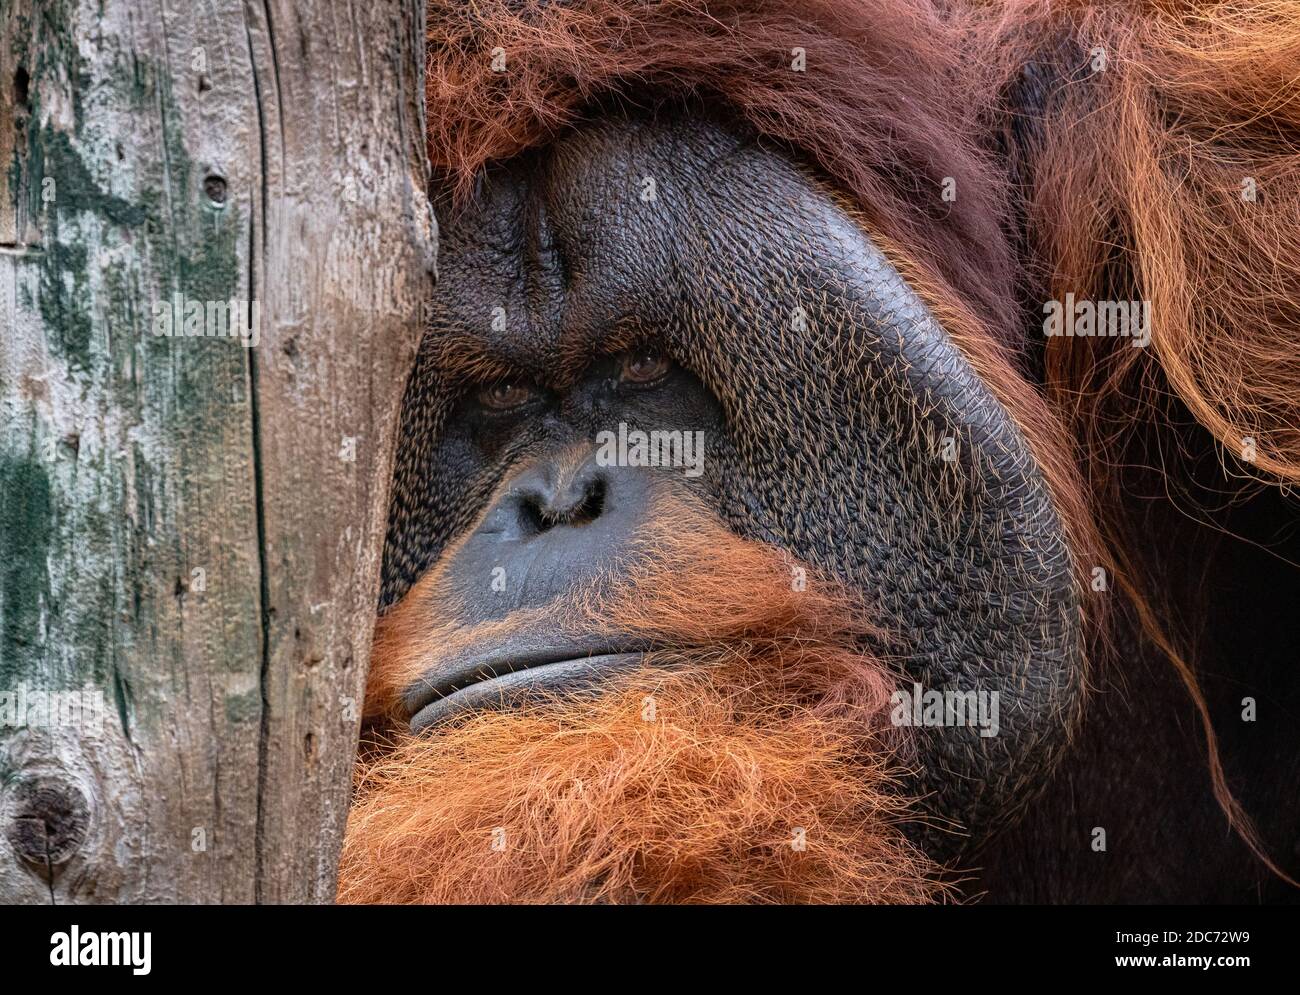 Portrait of an orangutan with his eyes fixed on the tree. Stock Photo